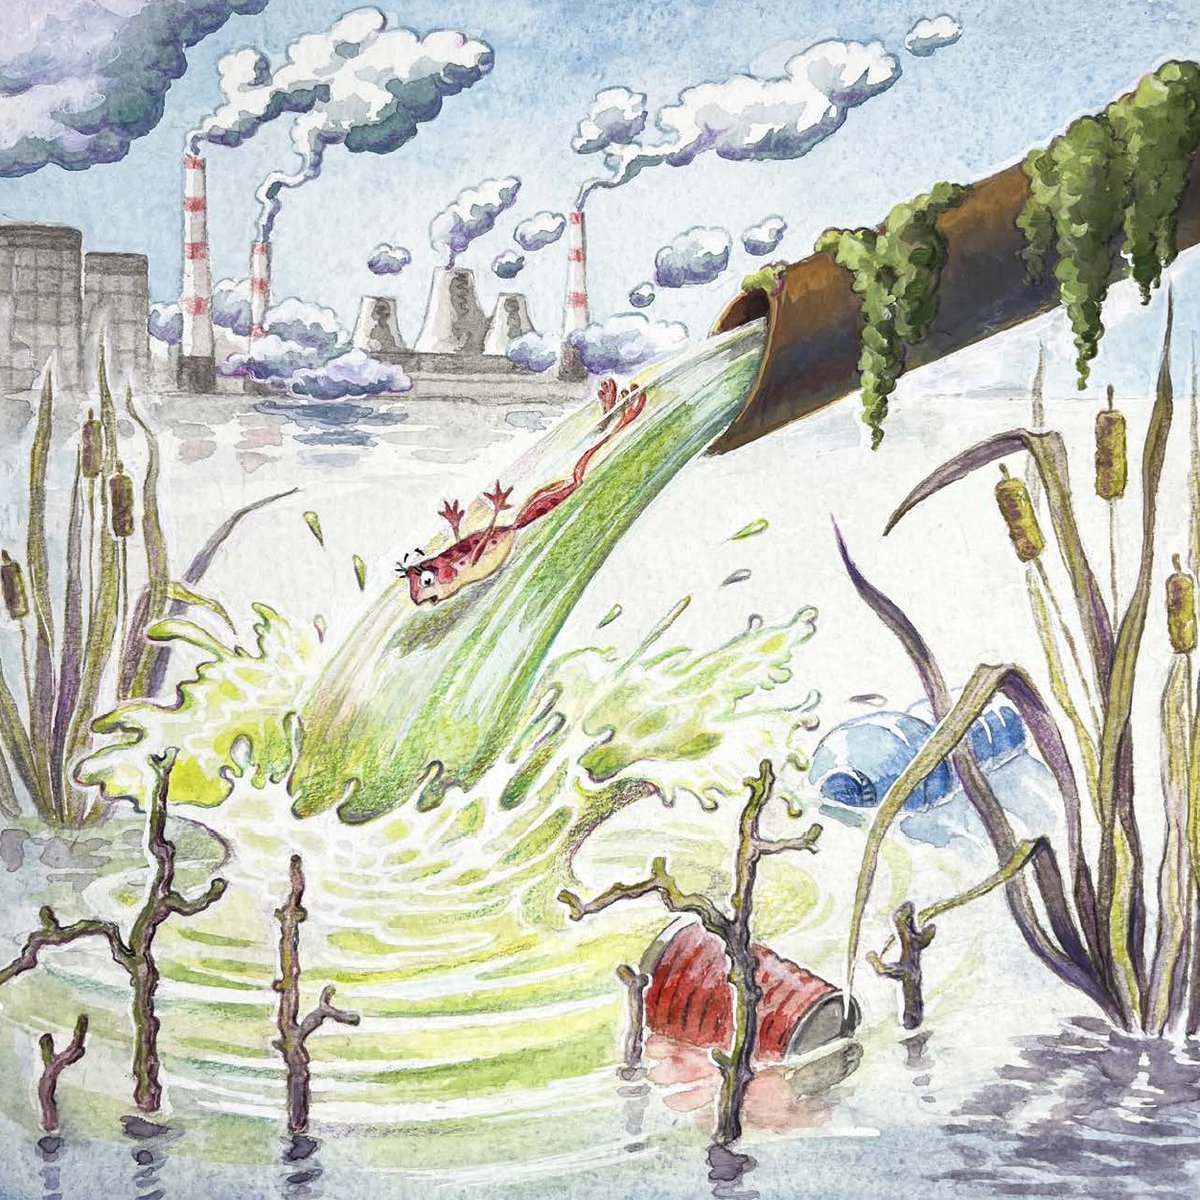 Here's a preview from the next book in the #frogsbog series to mark The International Day of Action for Rivers. Illustration by Mariela Malova says it all. #rivers #waterways #kidlit #AuthorsOfTwitter